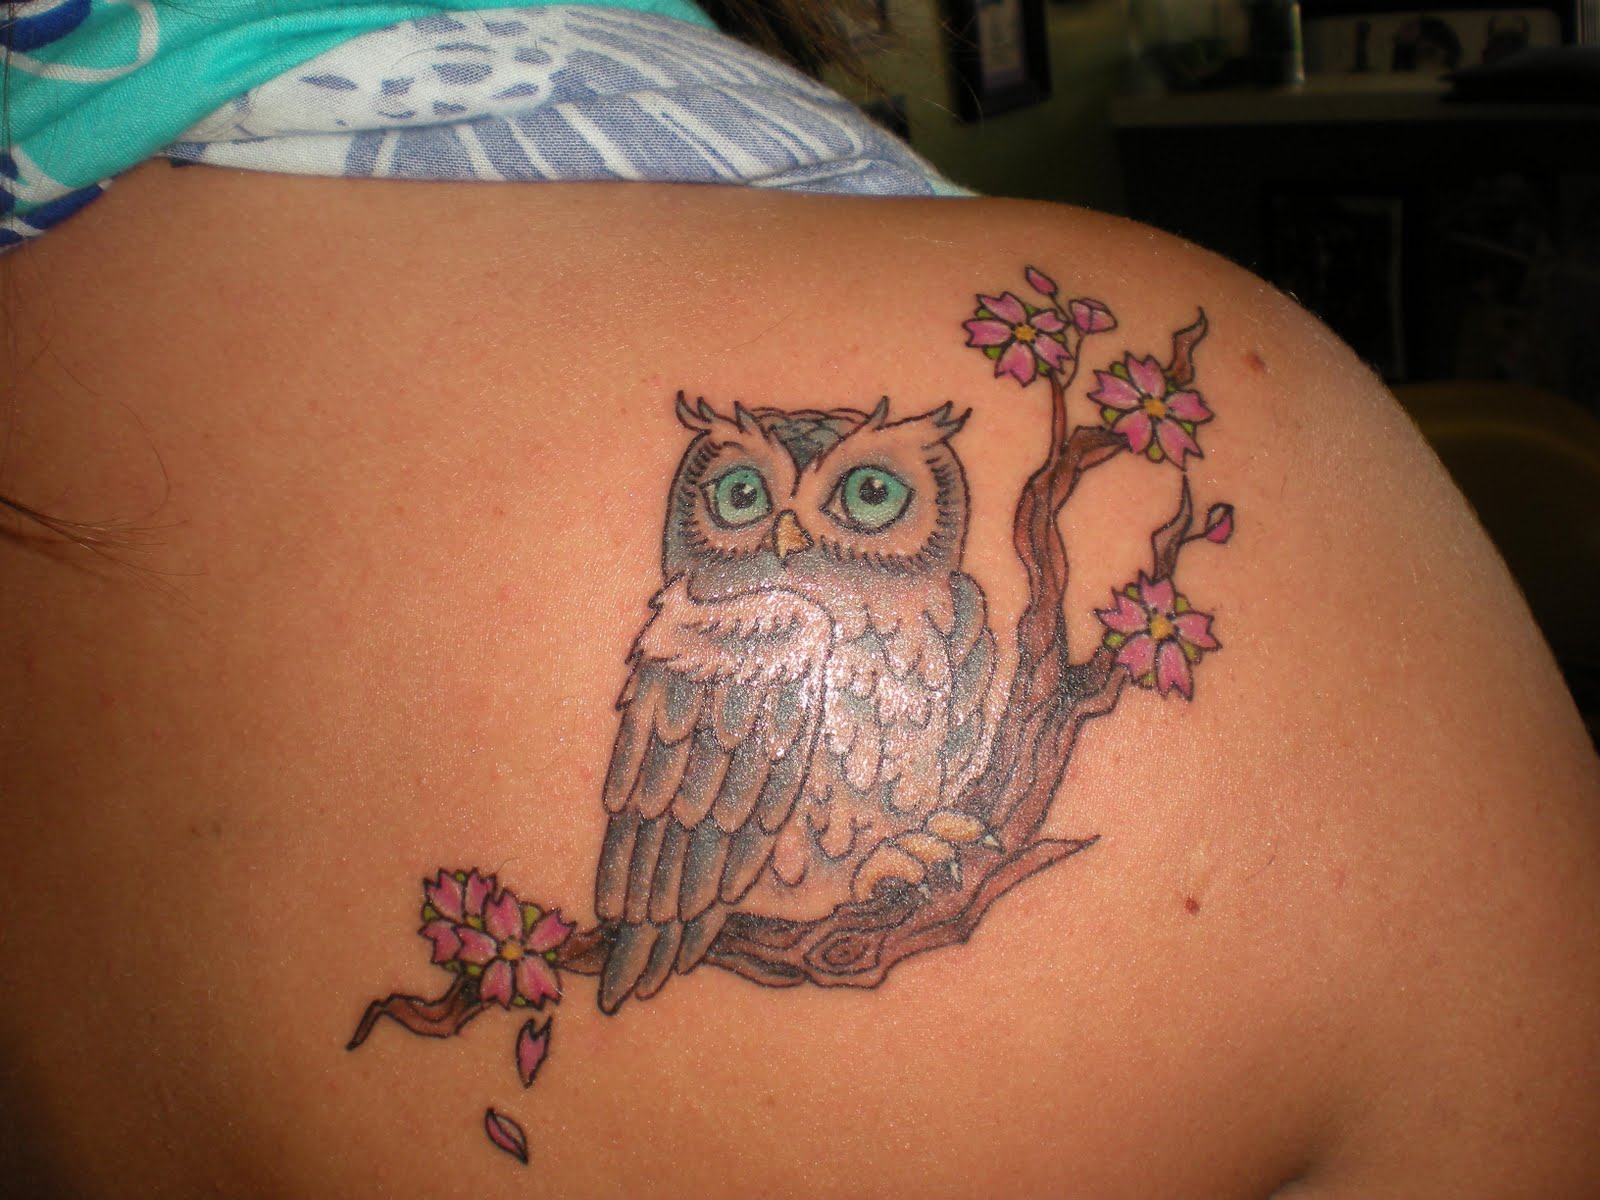 Simple Owl Tattoo Designs for Beginners - wide 10